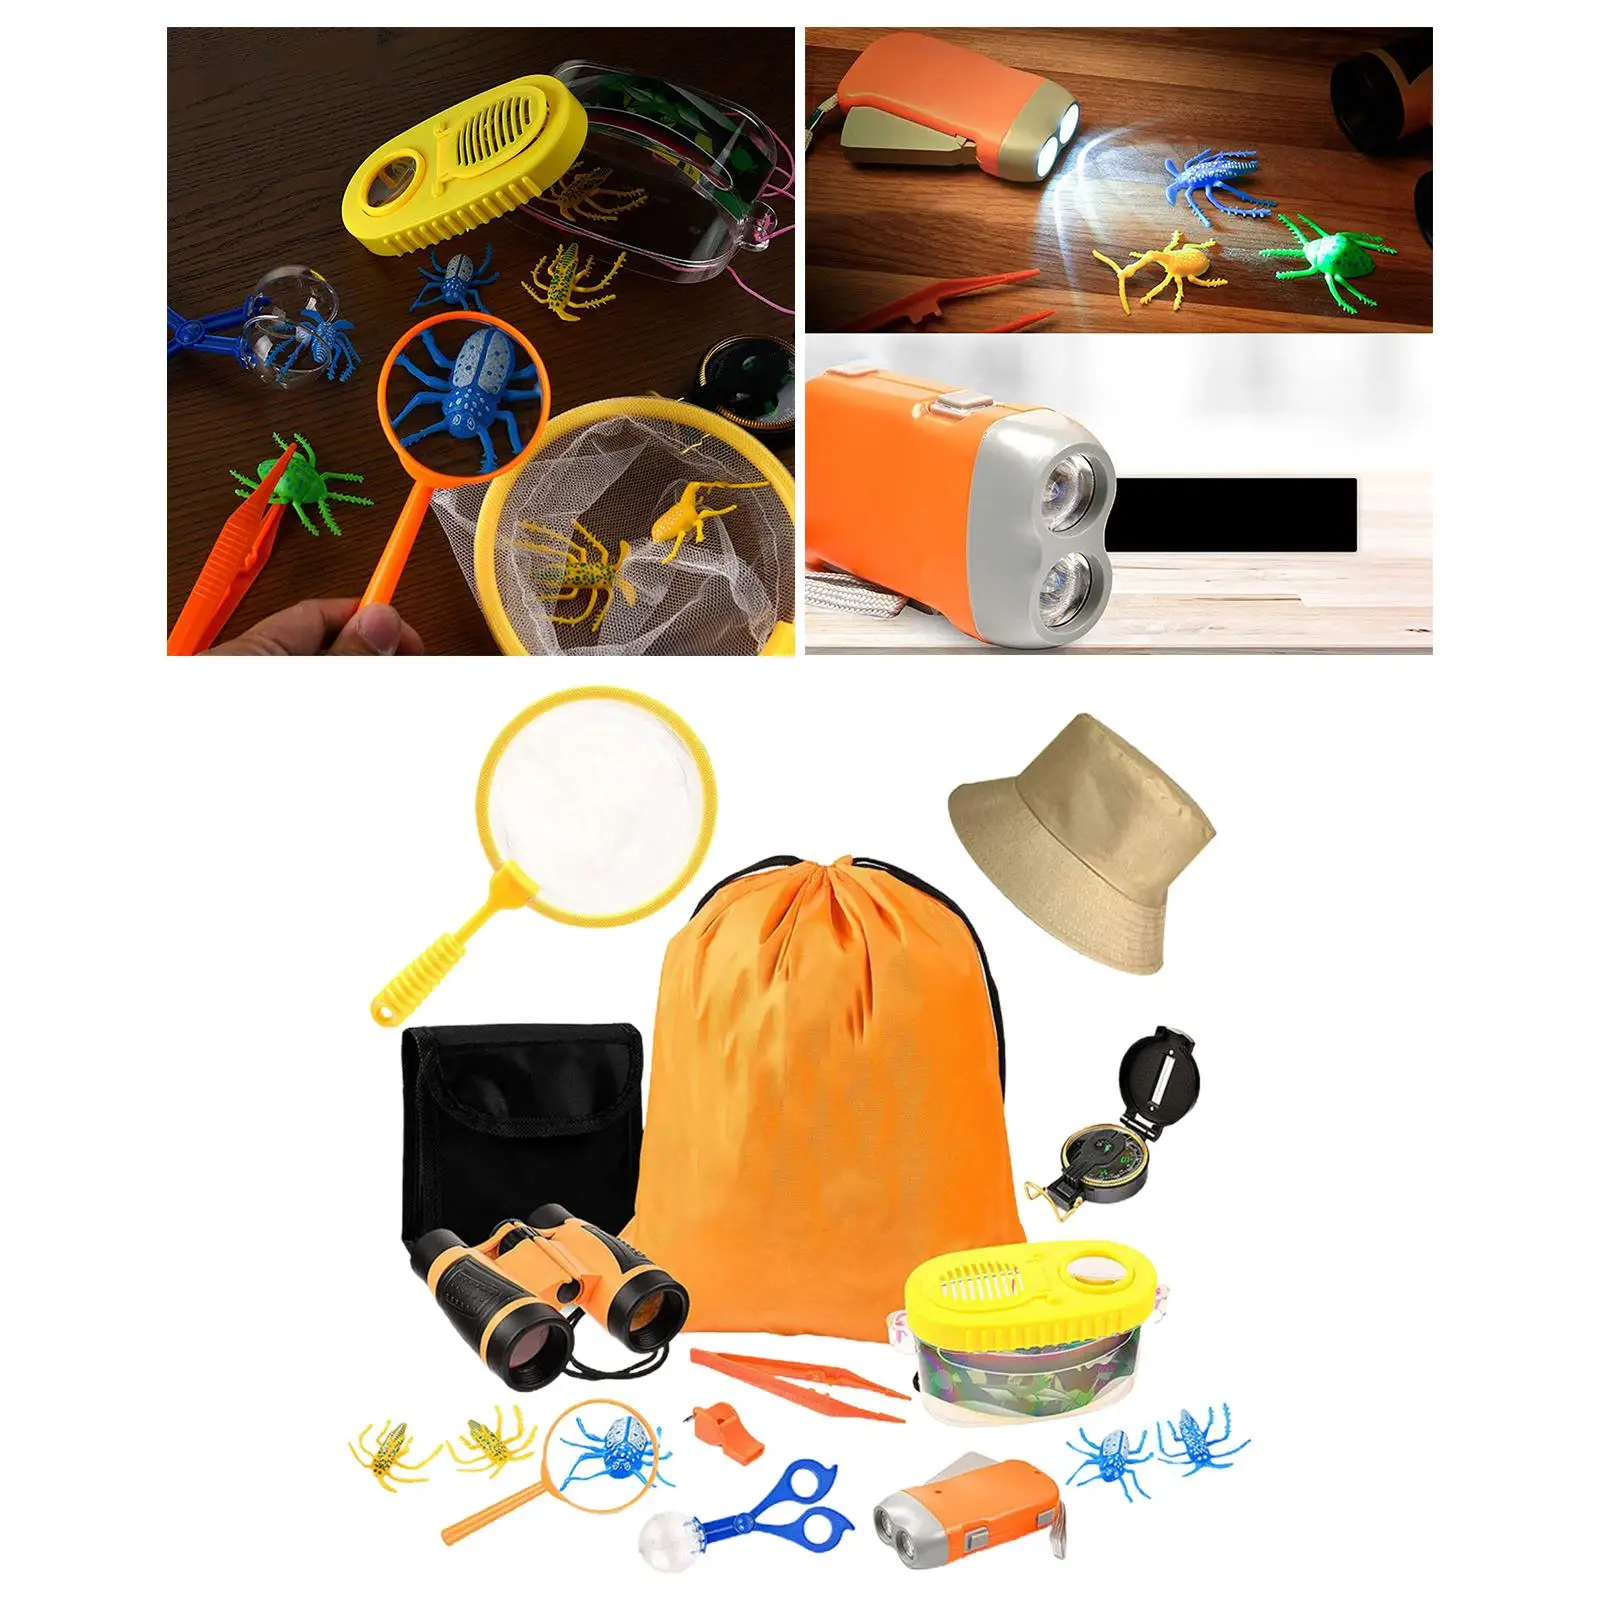 21 Pieces Bug Catcher Kits Insect Box Magnifying Glass Butterfly Net Backpack Compass Outdoor Explorer Bug Collection for Kids